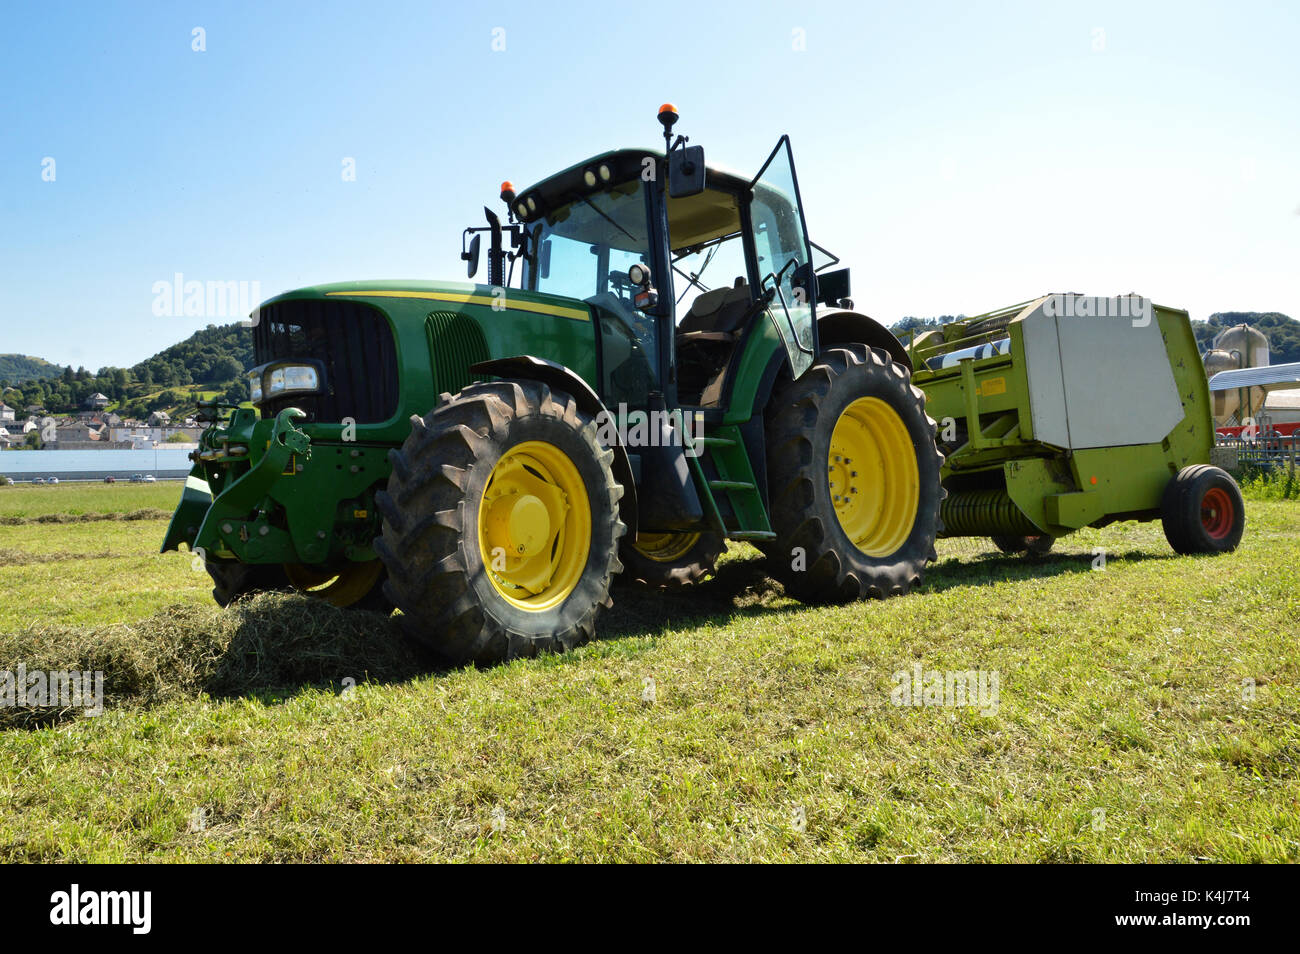 An agricultural tractor with a baler to harvest straw and hay. (Straw and hay bales) Stock Photo